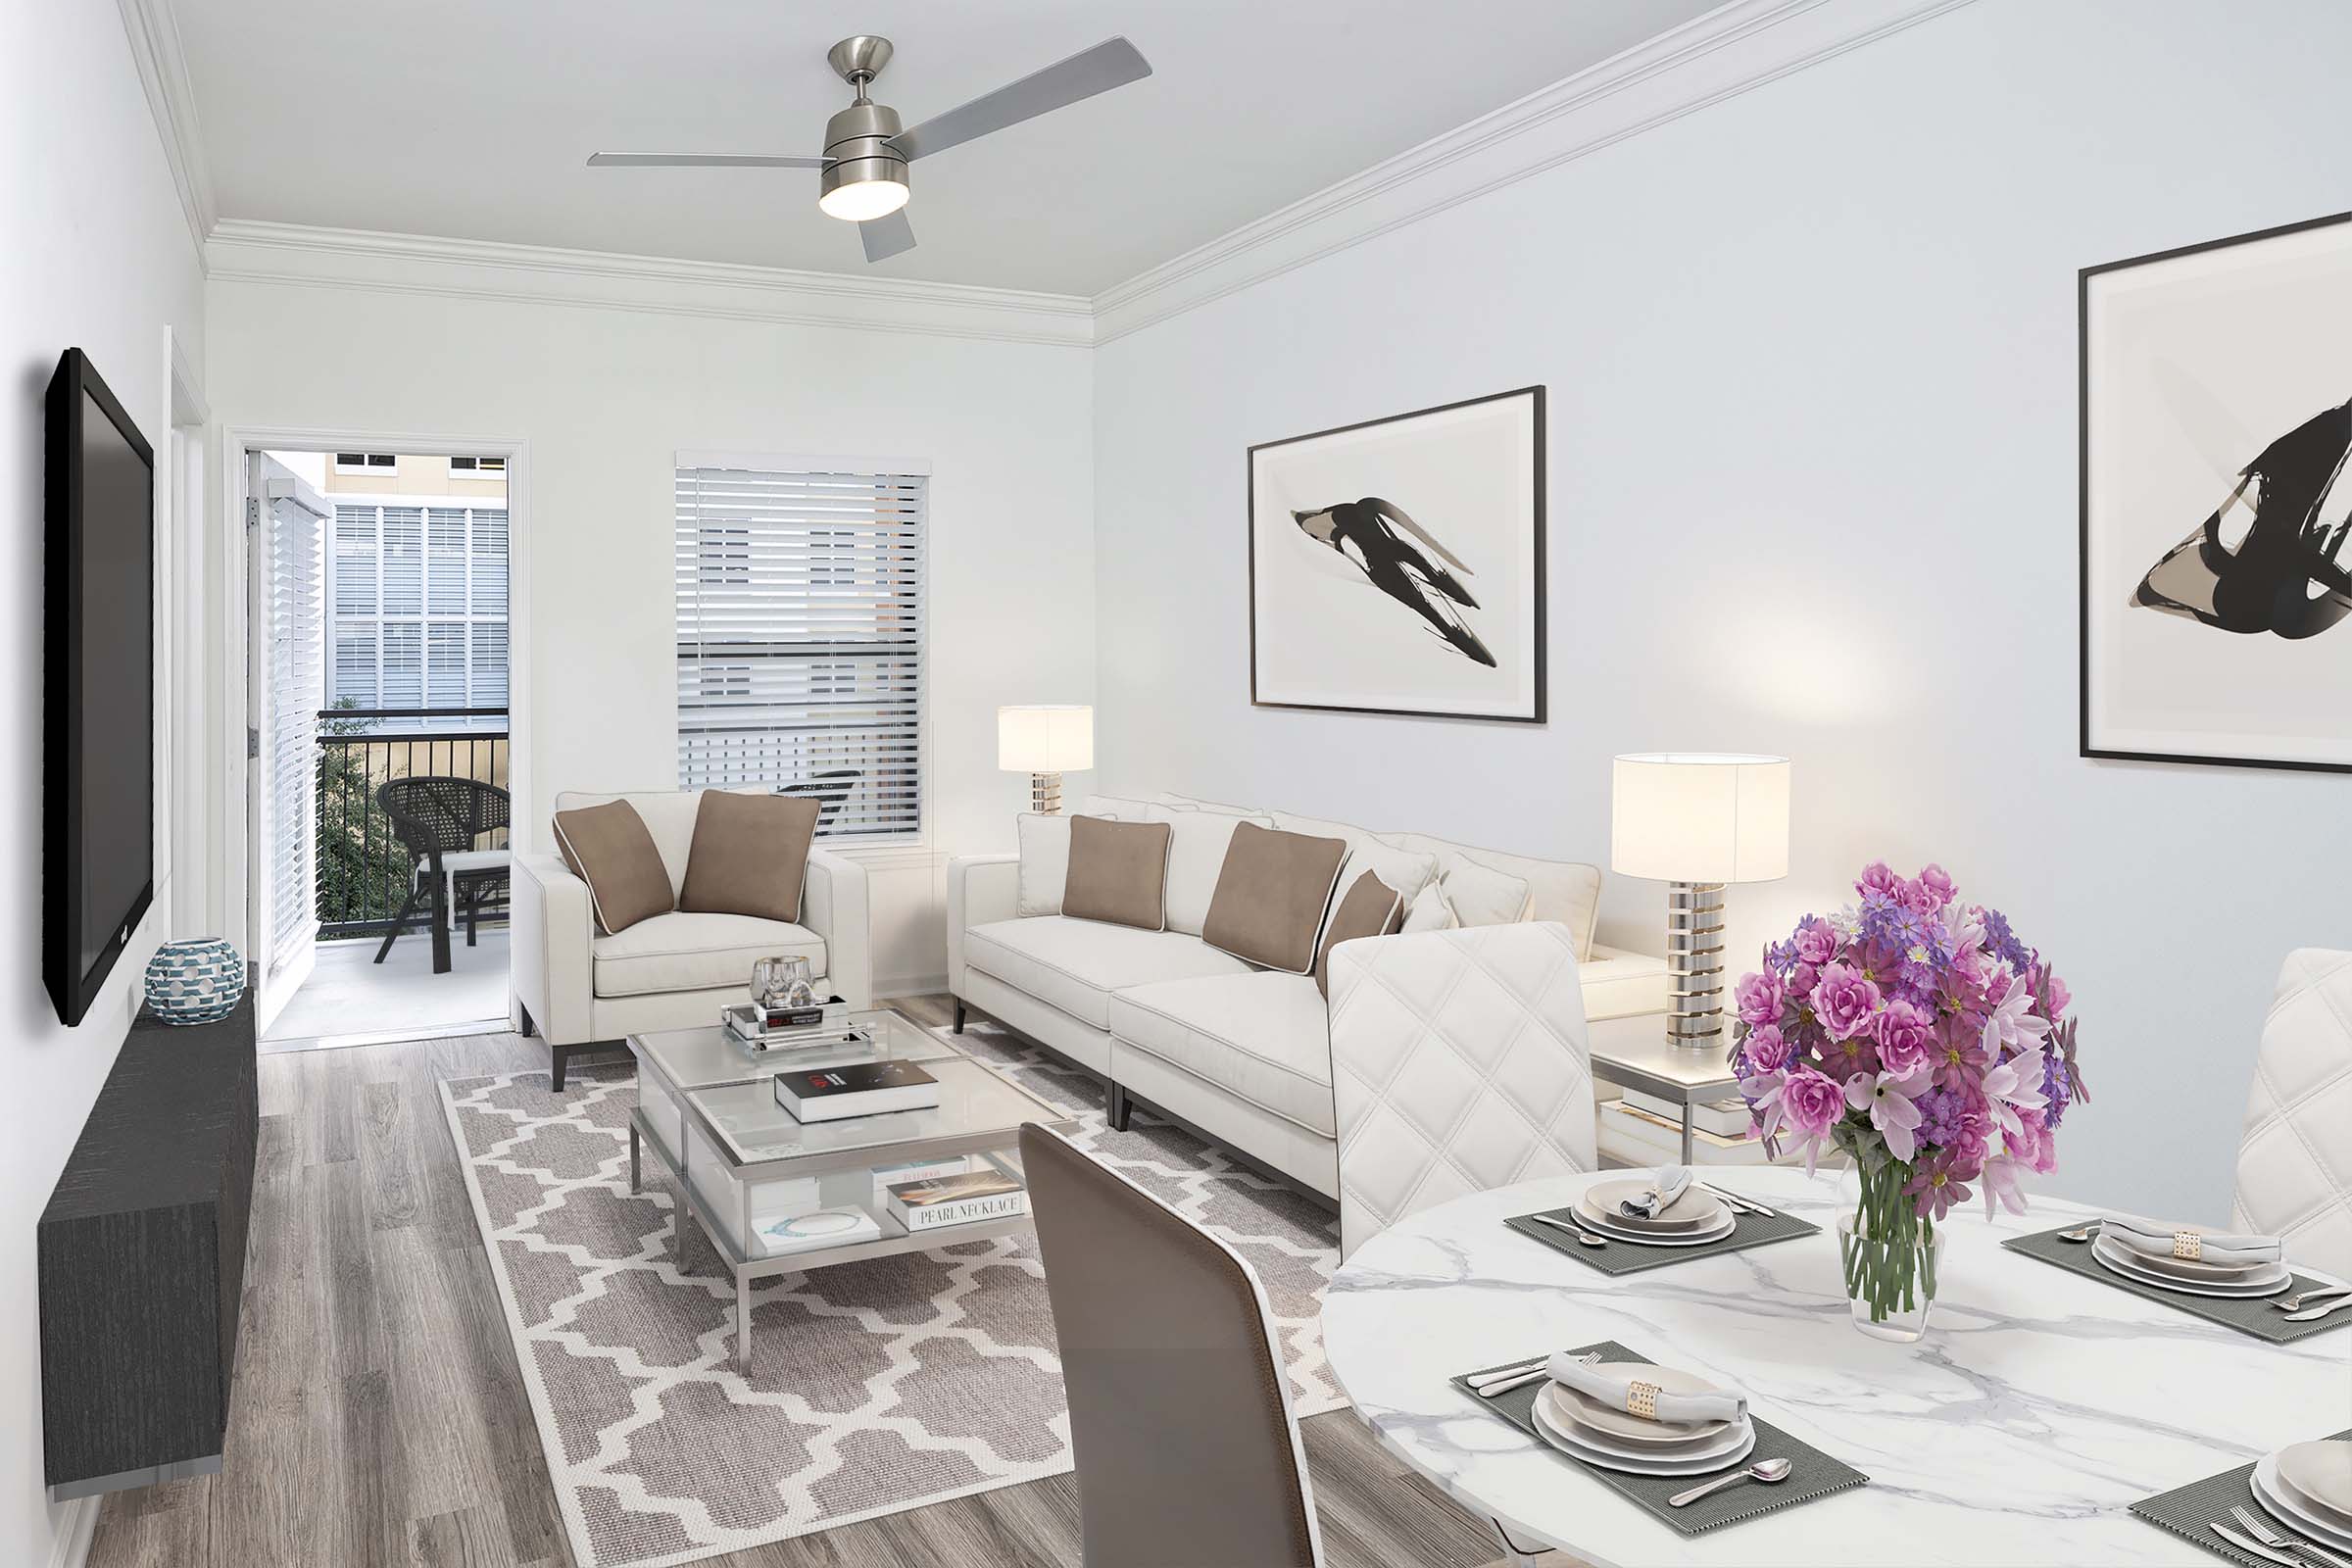 Beautifully renovated living room featuring crown molding and ceiling fan with LED lighting.